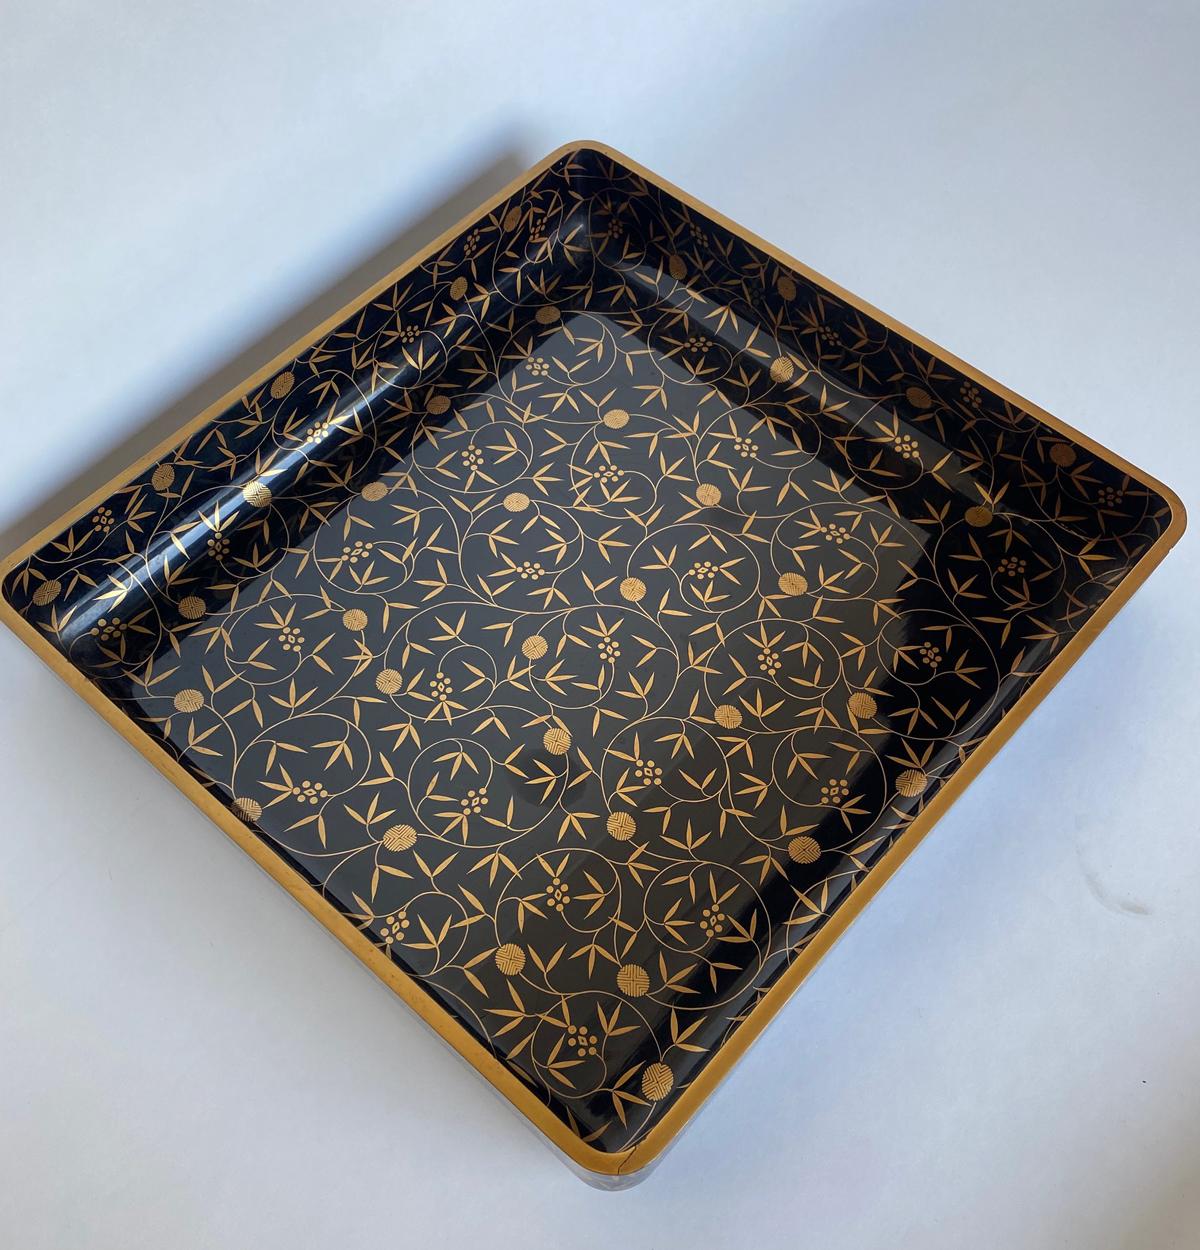 Large scale beautifully hand painted Japanese lacquer tray. The background is deep black and the decorations are in delicate gold. there is a slight warp which can be taken care of with an extra non scratch pad the corner. Fully functional. Would